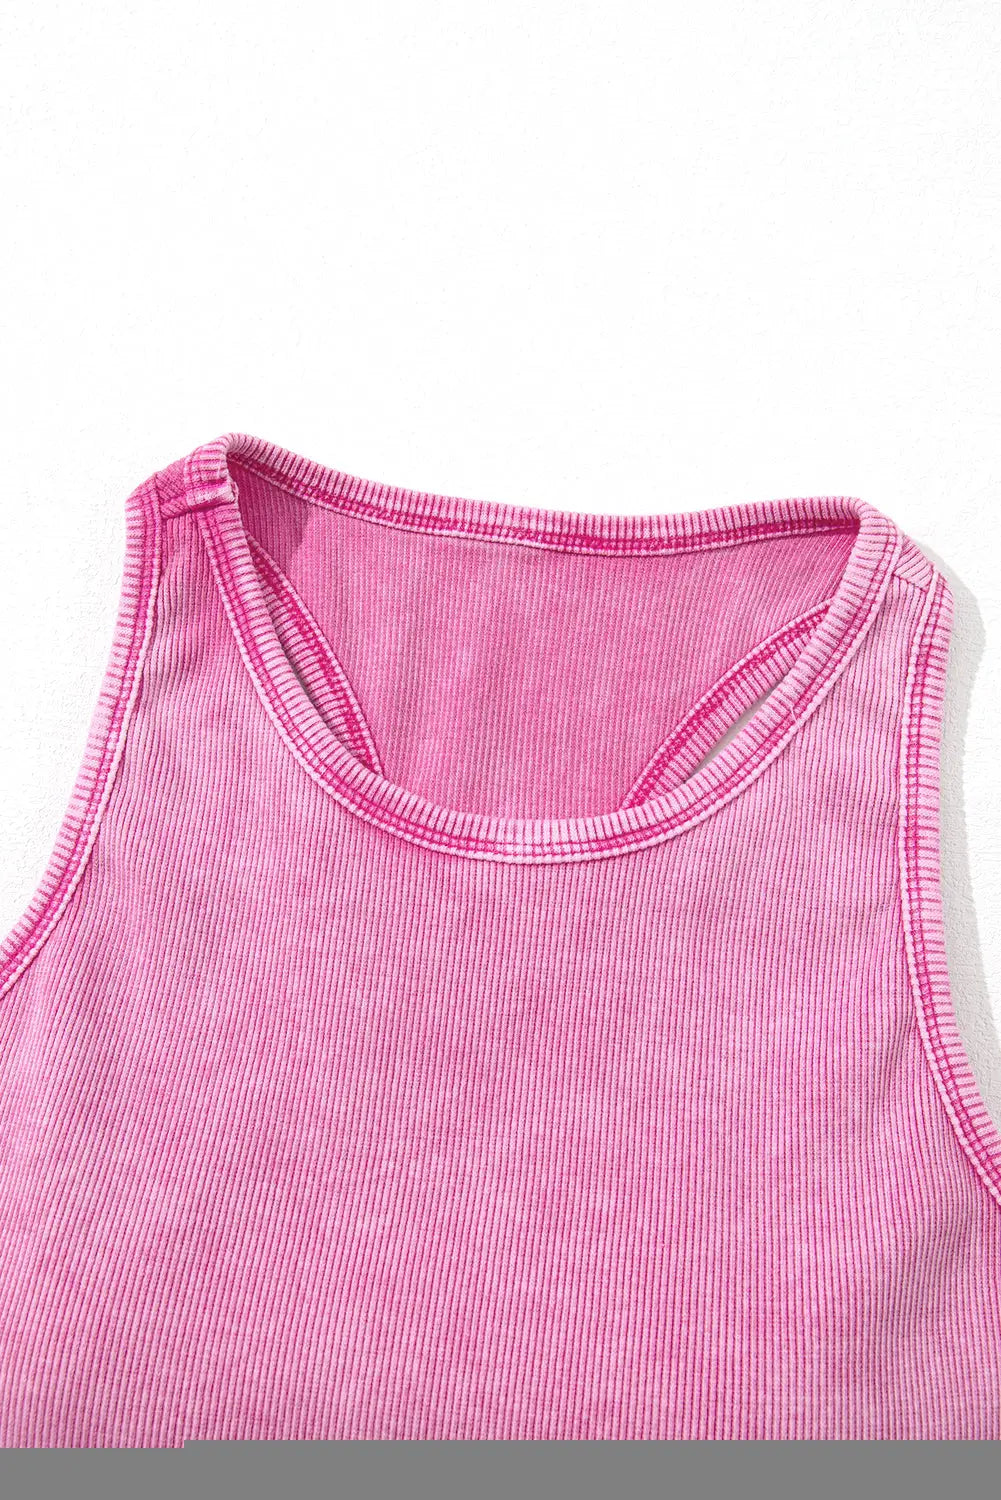 Tillandsia purple ribbed mineral wash racerback cropped tank top - tops